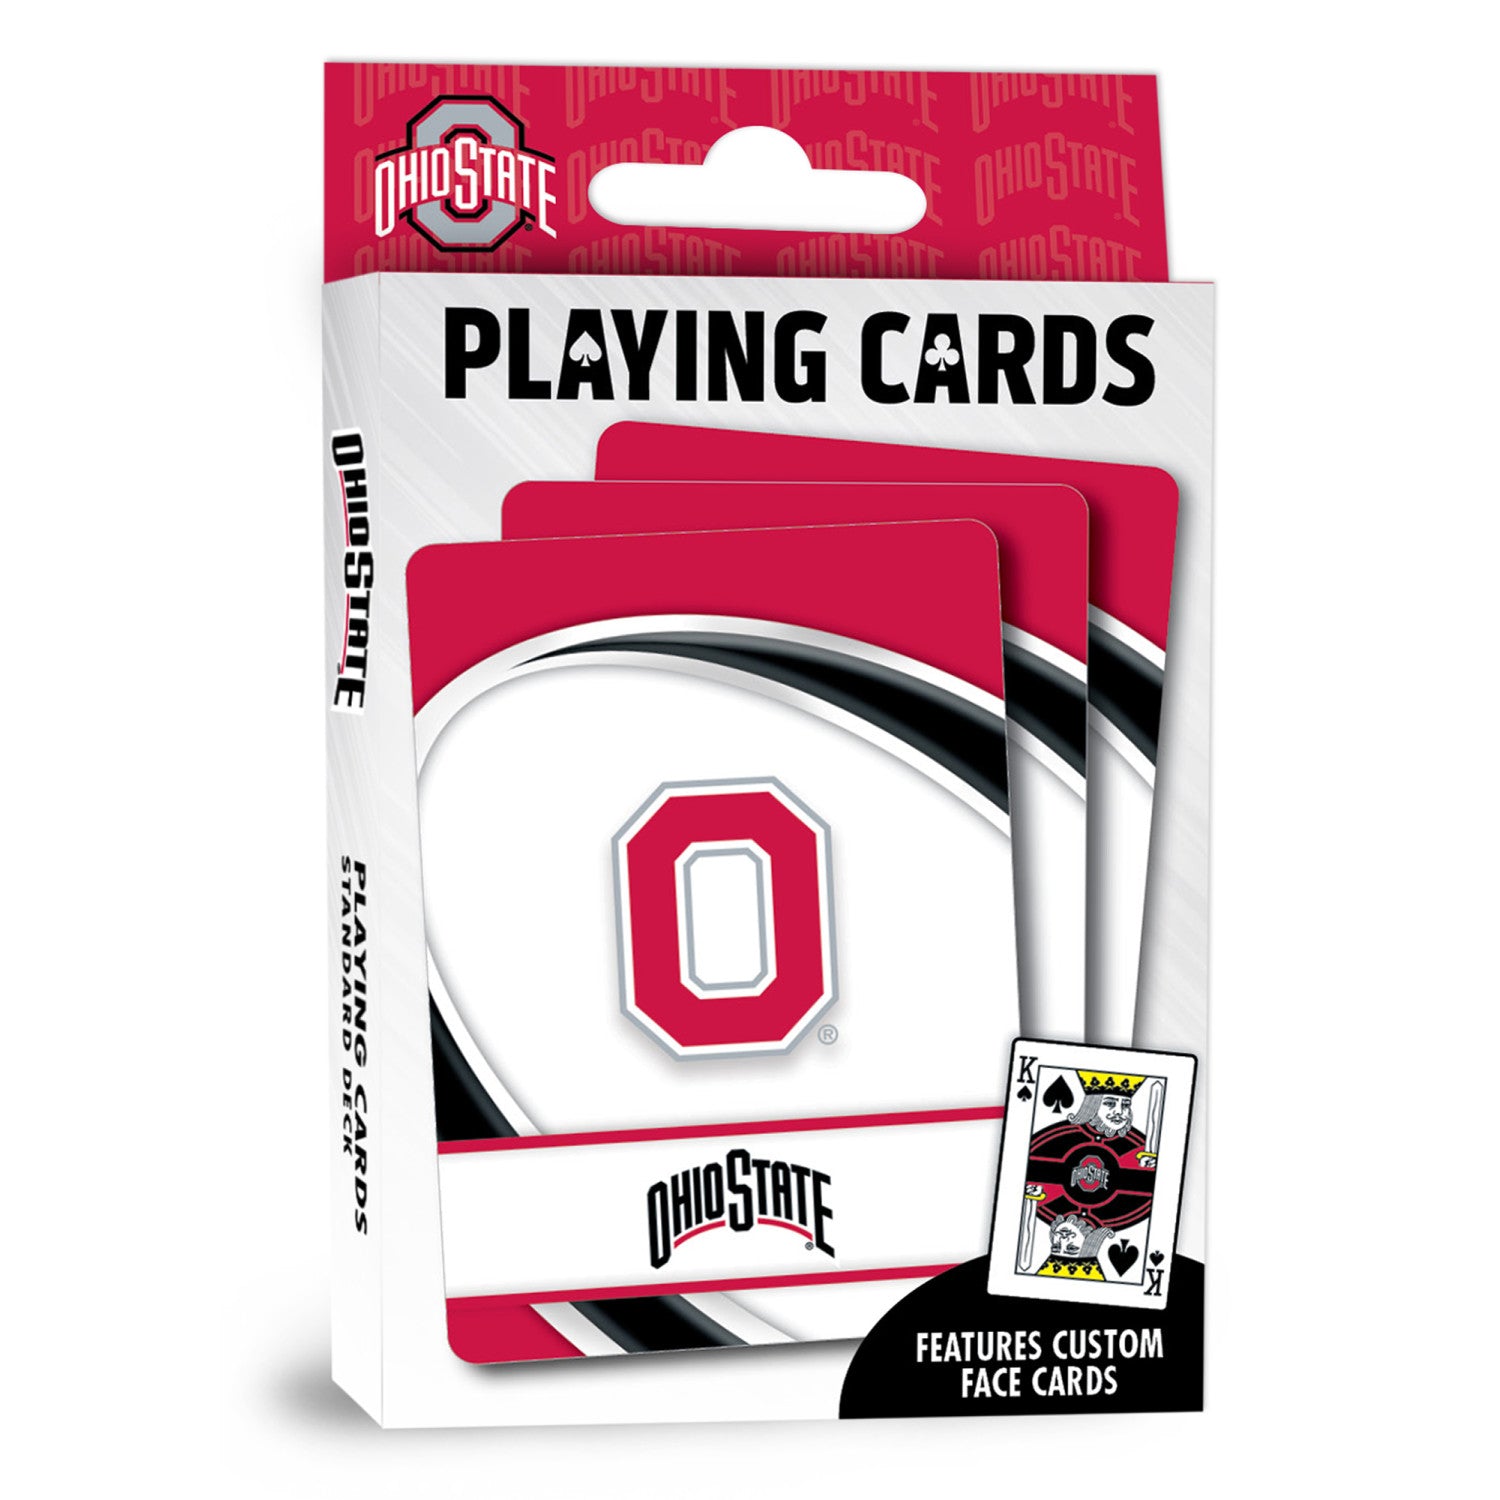 Ohio State Buckeyes Playing Cards - 54 Card Deck